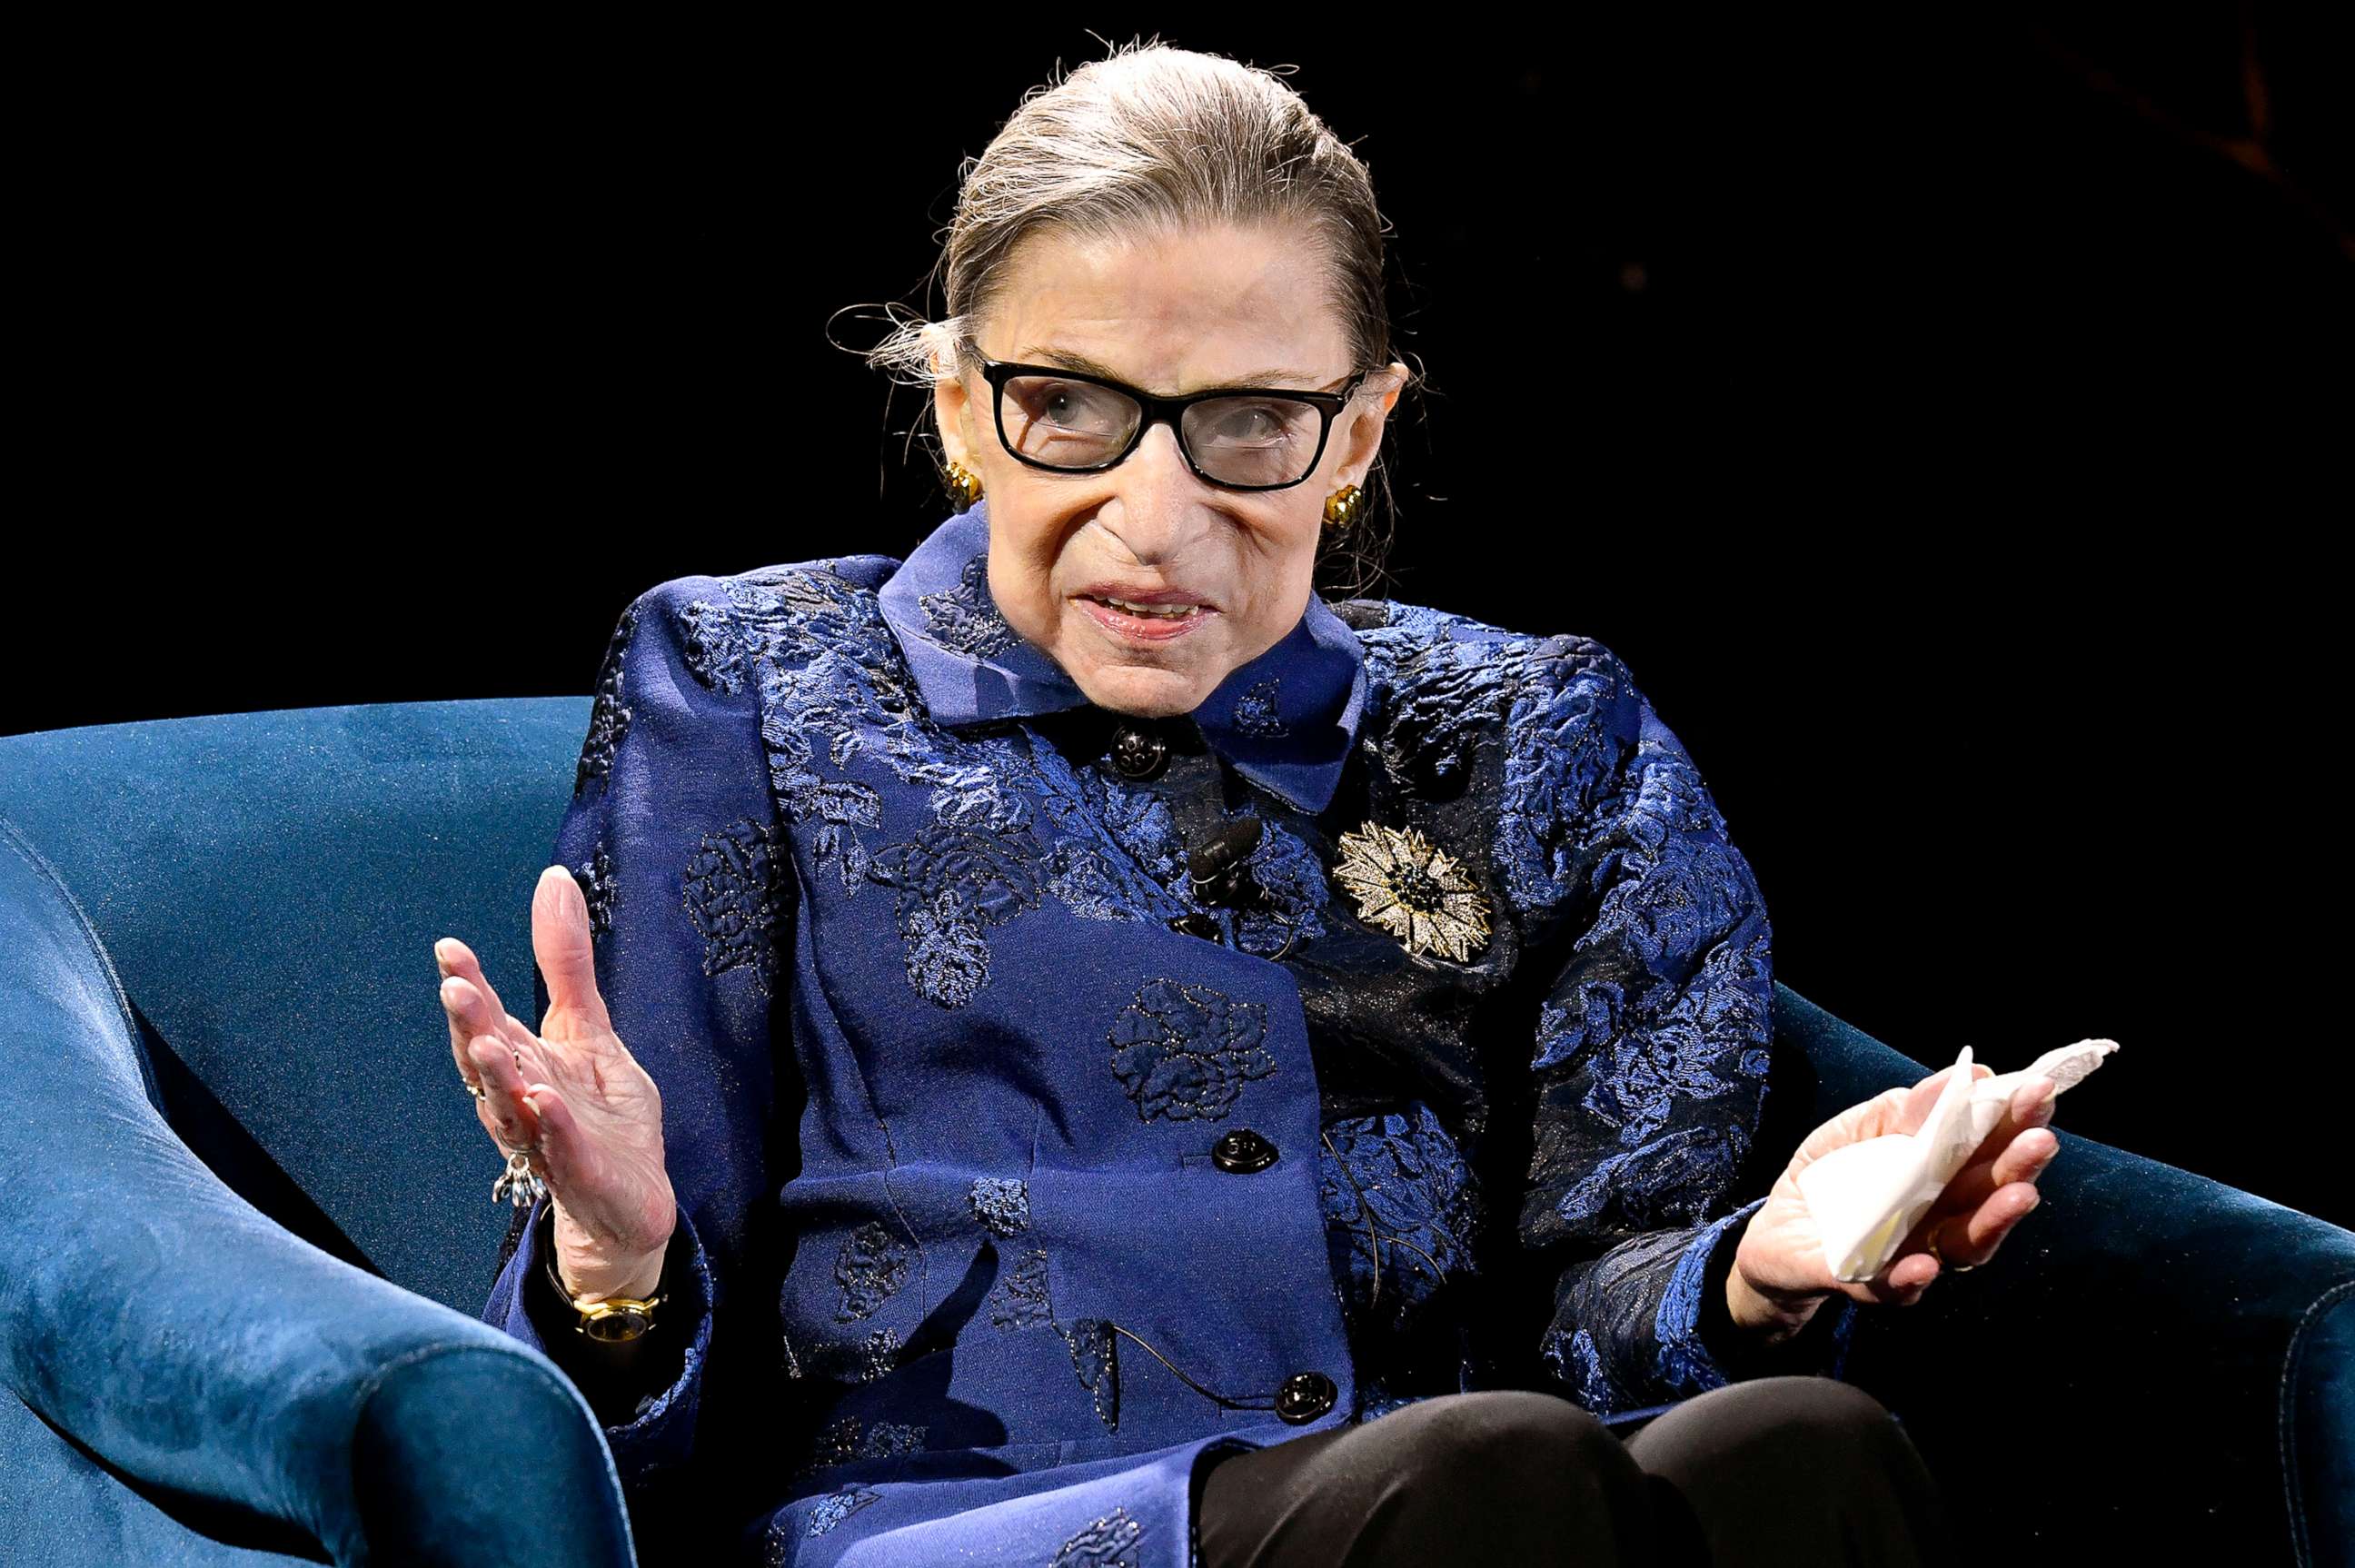 PHOTO: Justice Ruth Bader Ginsburg speaks onstage at the Fourth Annual Berggruen Prize Gala celebrating 2019 Laureate Supreme Court Justice Ruth Bader Ginsburg, In New York City, on December 16, 2019.